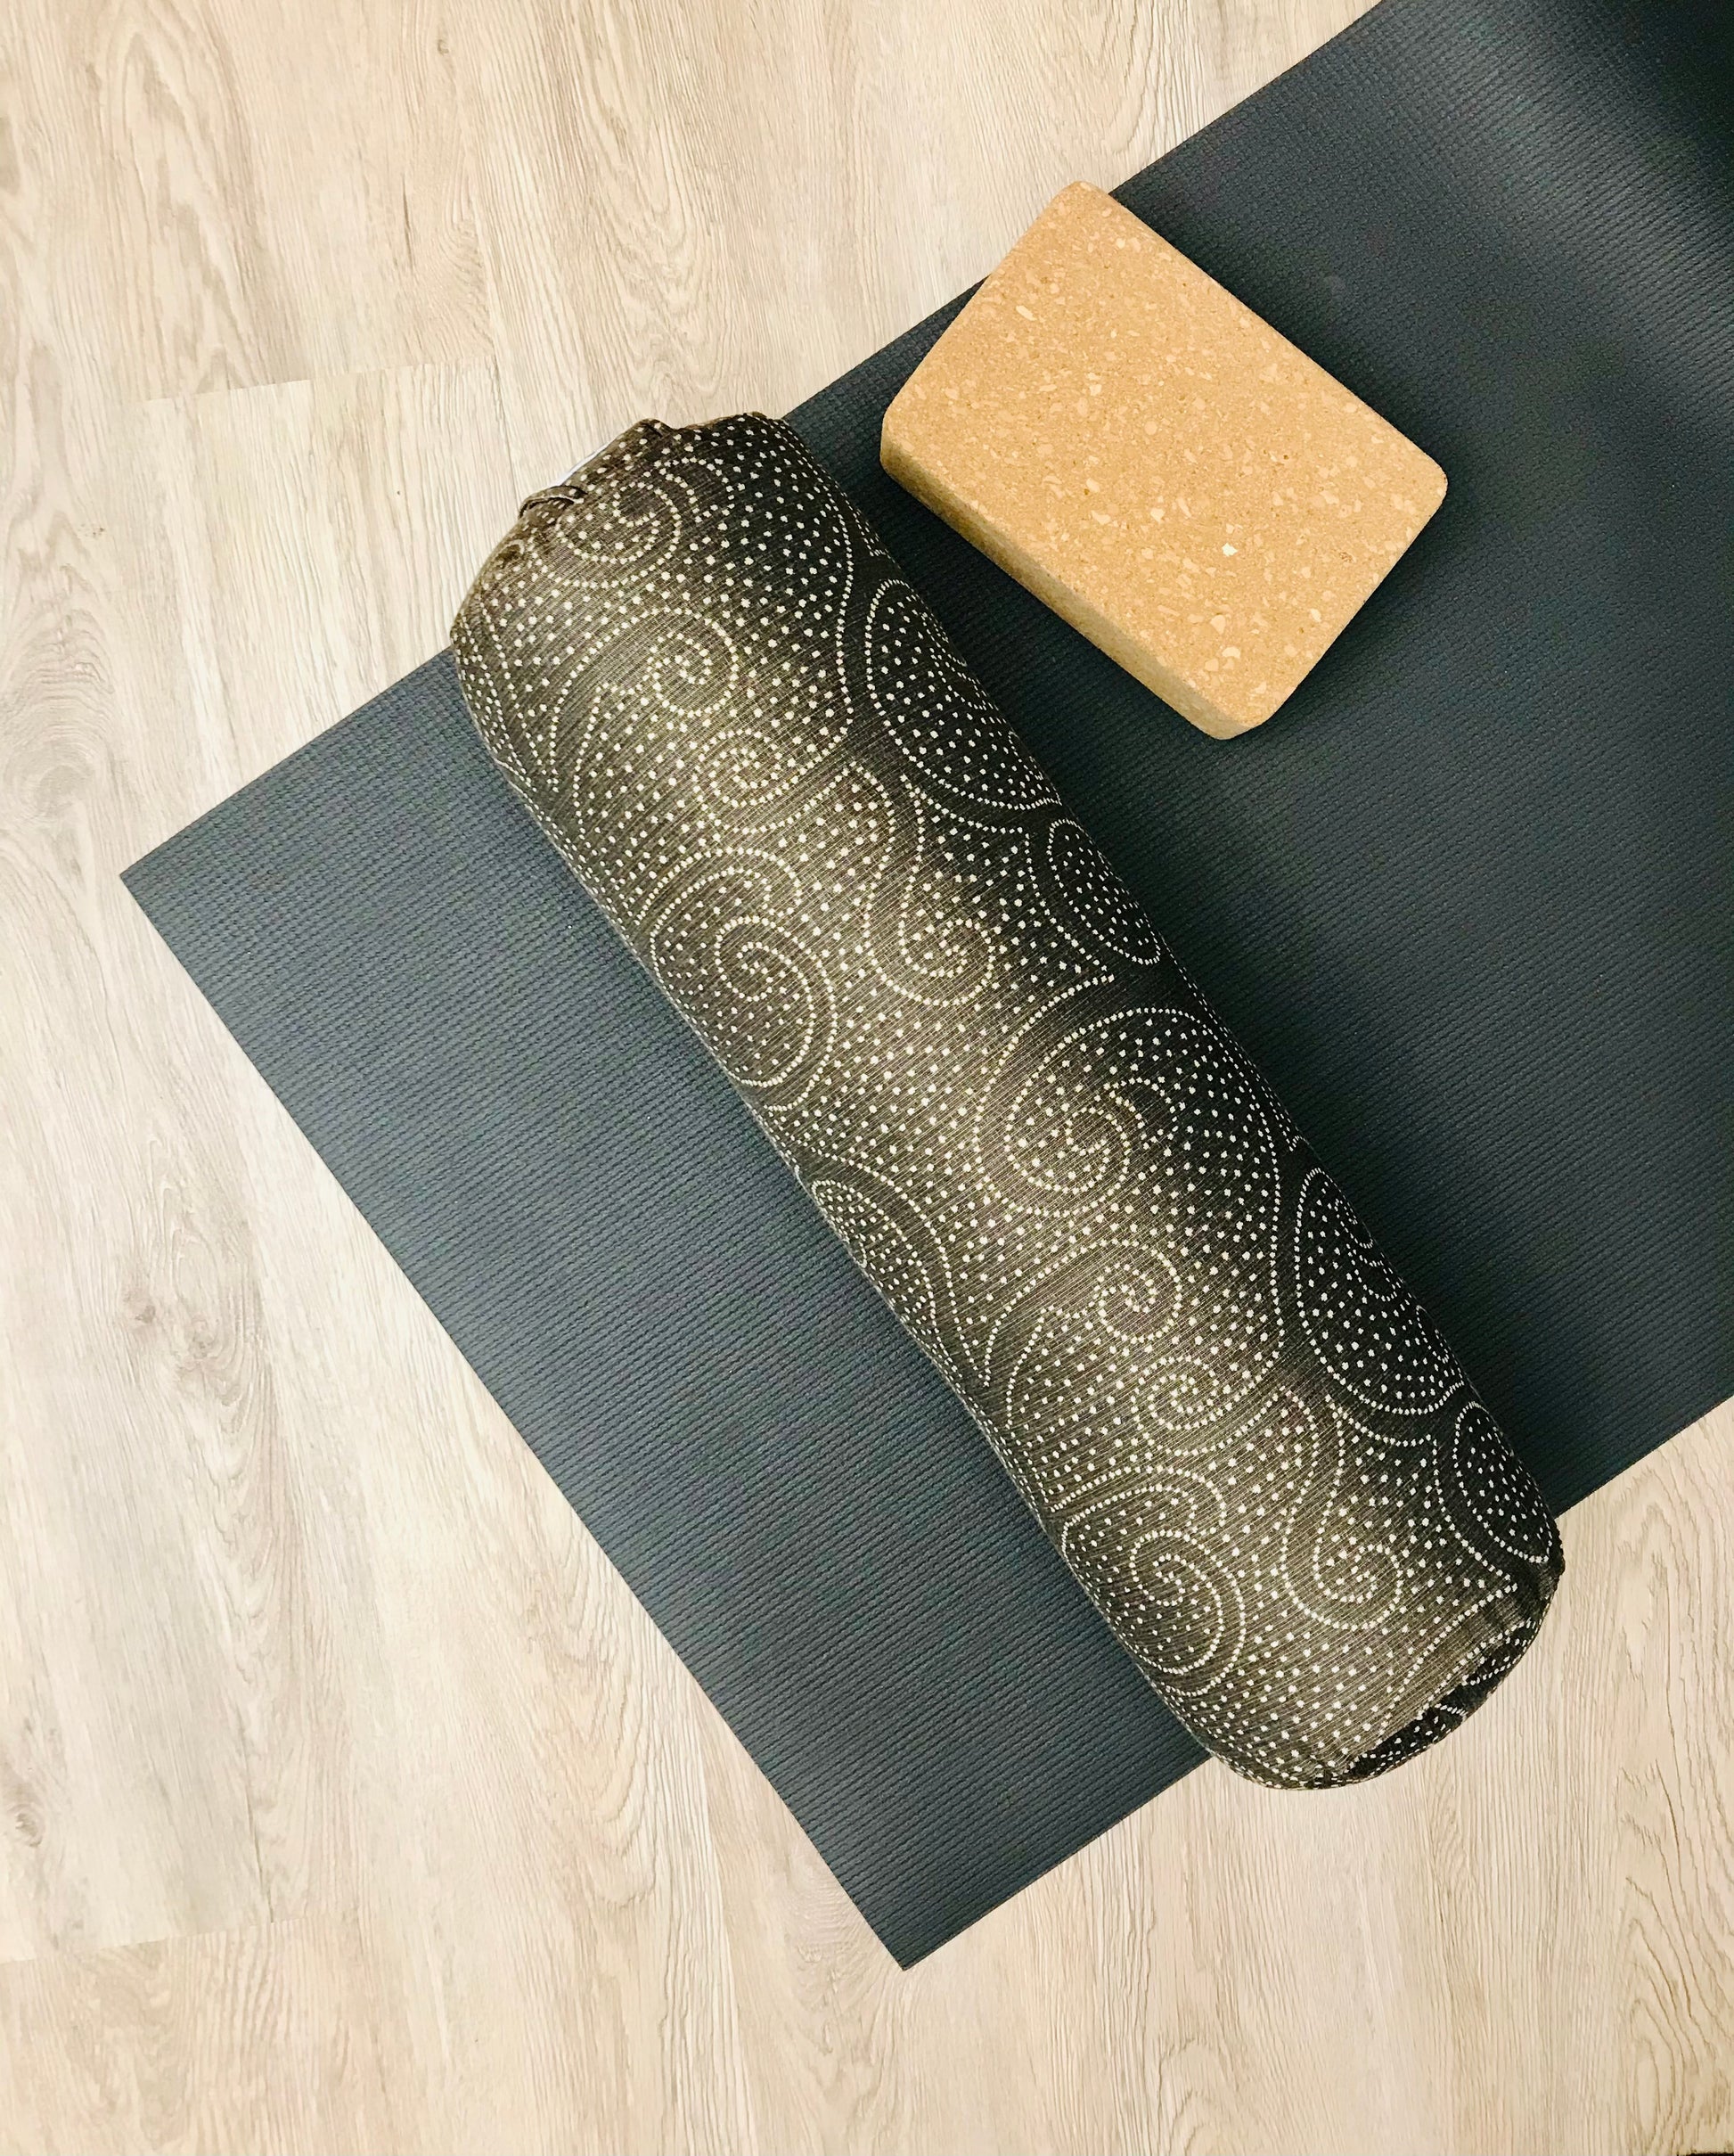 Round yoga bolster in brown durable swirl print fabric . Allergy conscious fill with removeable cover. Made in Canada by My Yoga Room Elements